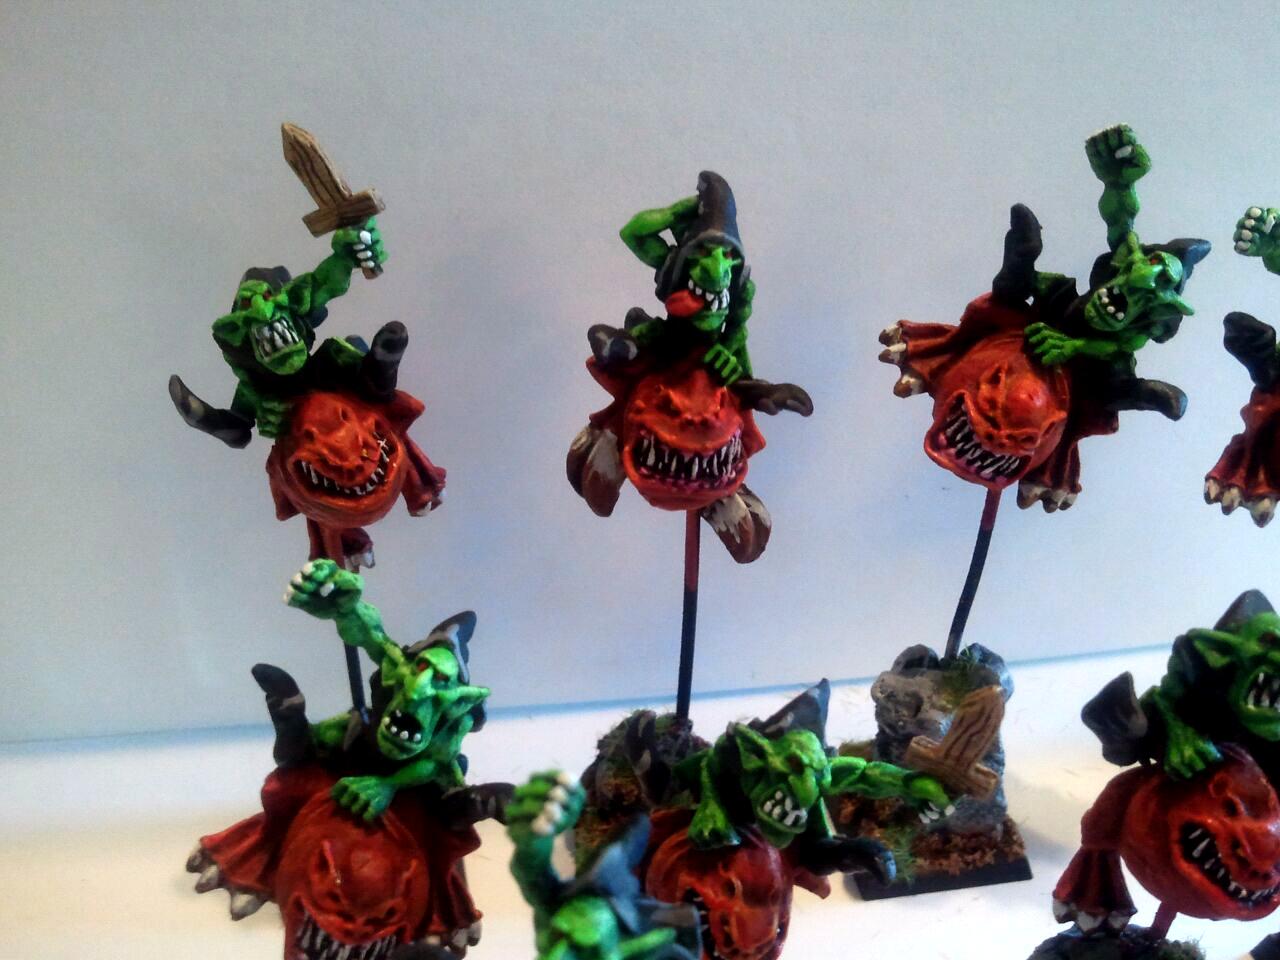 Based, Cool Bases, Goblins, Hoppers, Orcs, Squig Hoppers, Squigs